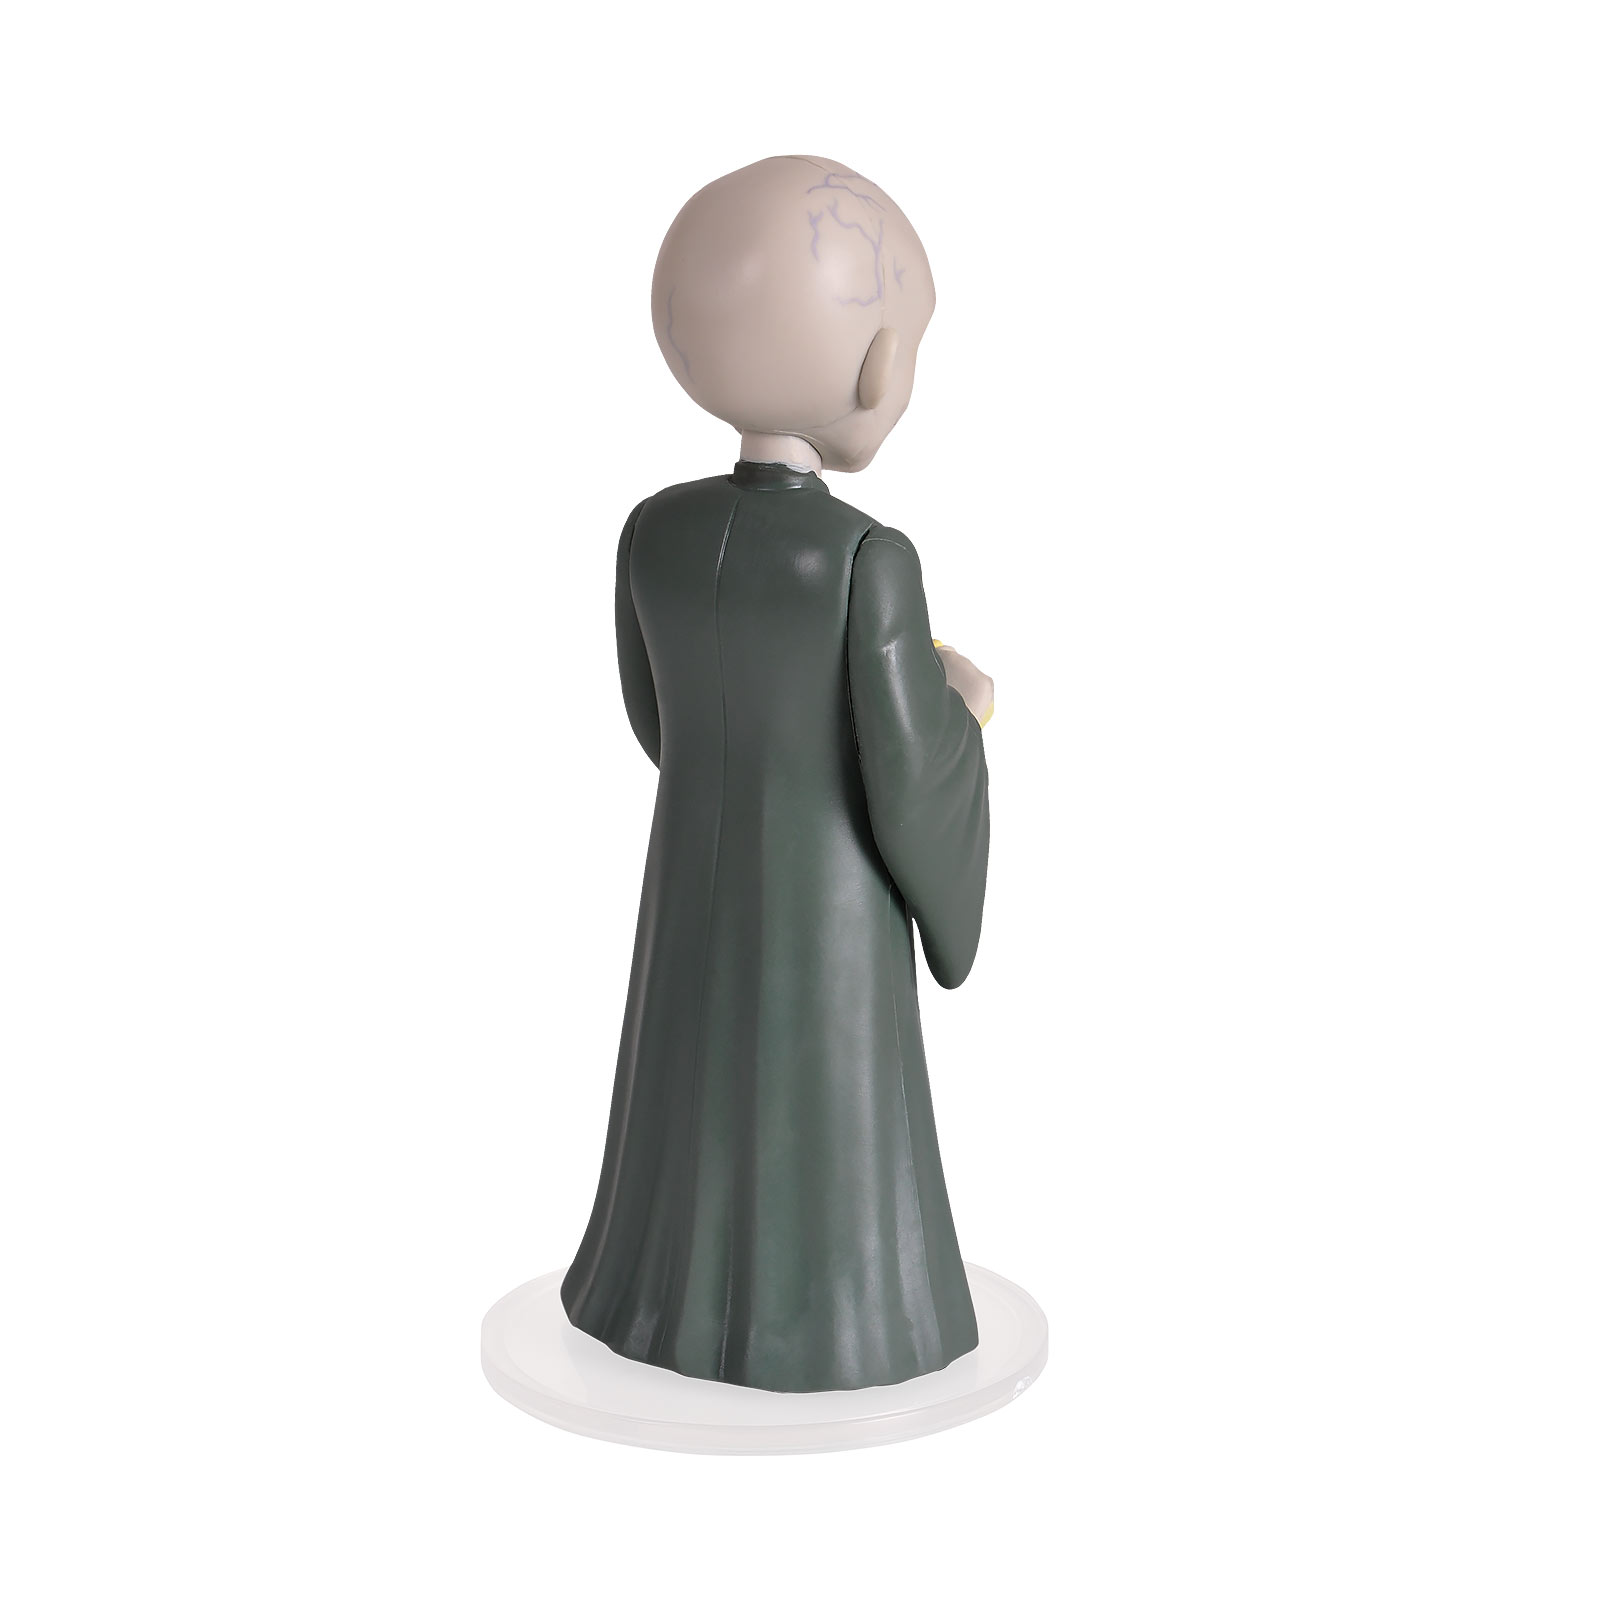 Harry Potter - Lord Voldemort Rock Candy Figur